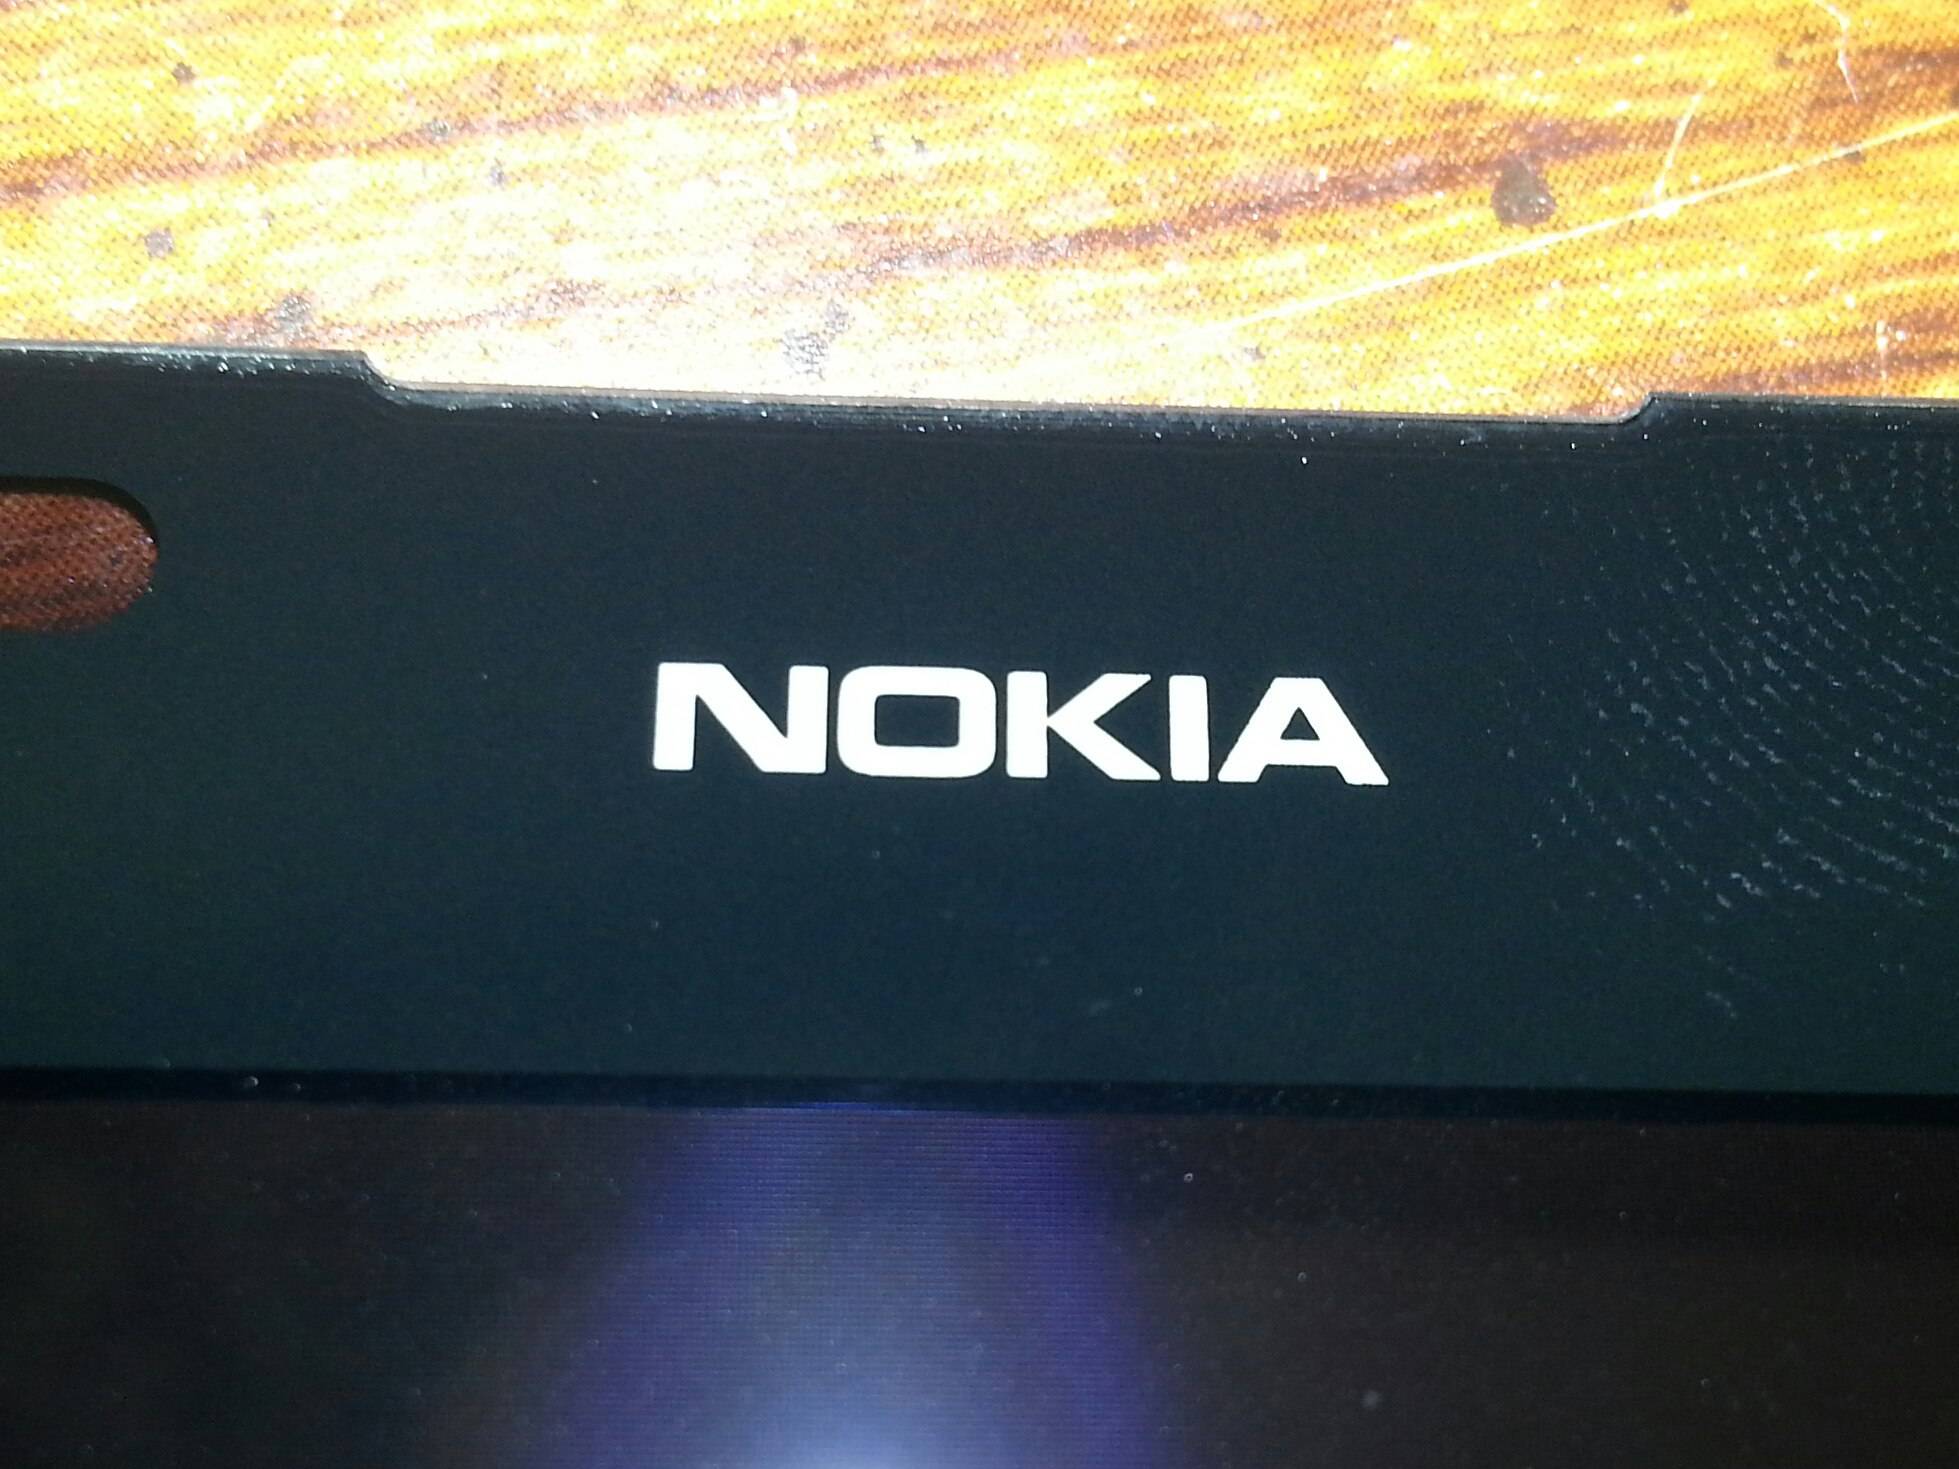 How Can I Find My Nokia Smartphone's Model Number?